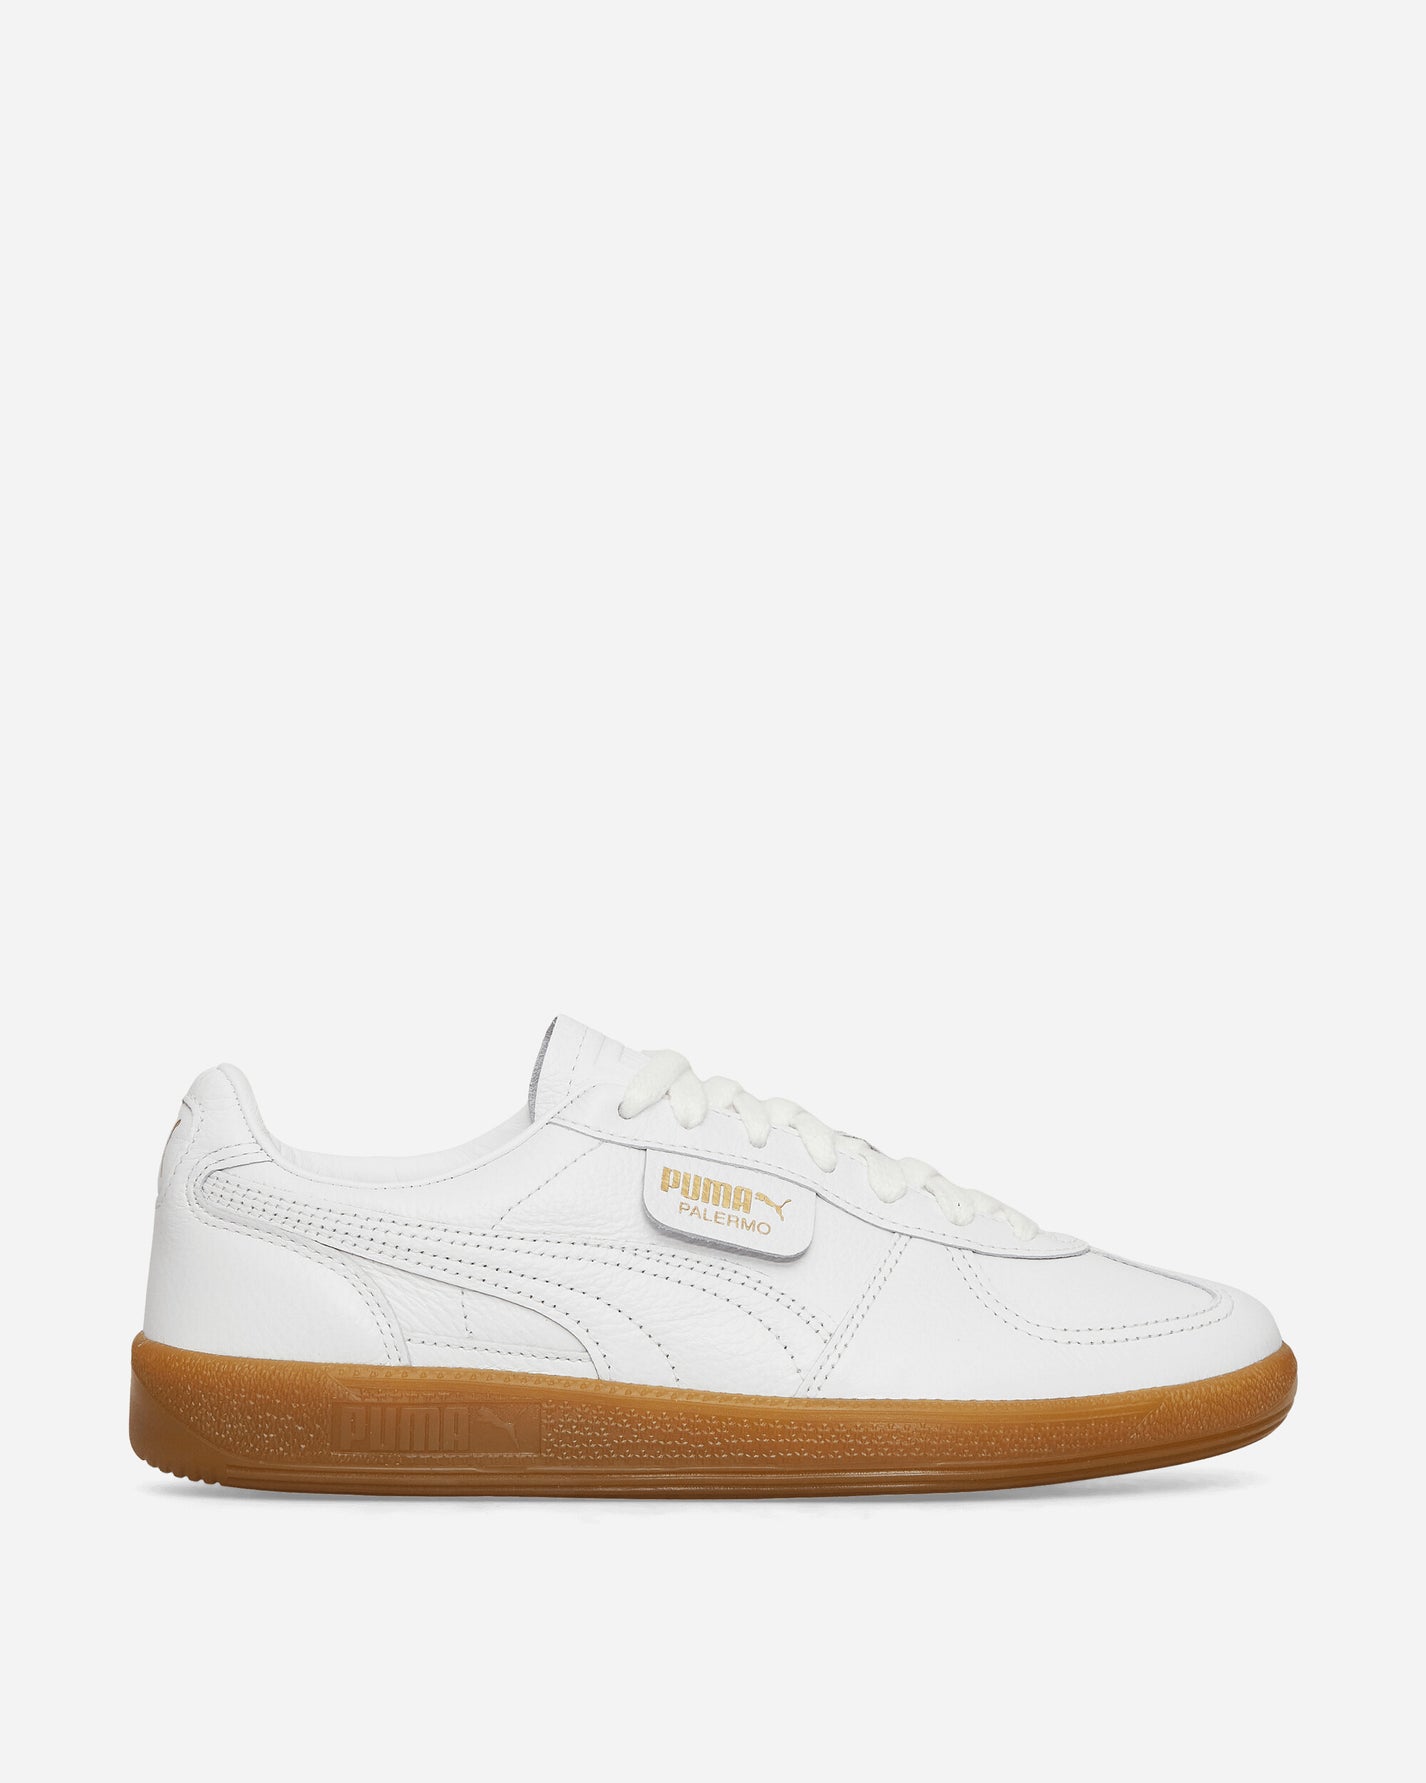 Puma Palermo Premium Puma White/Frosted Ivory Sneakers Low 397246-01